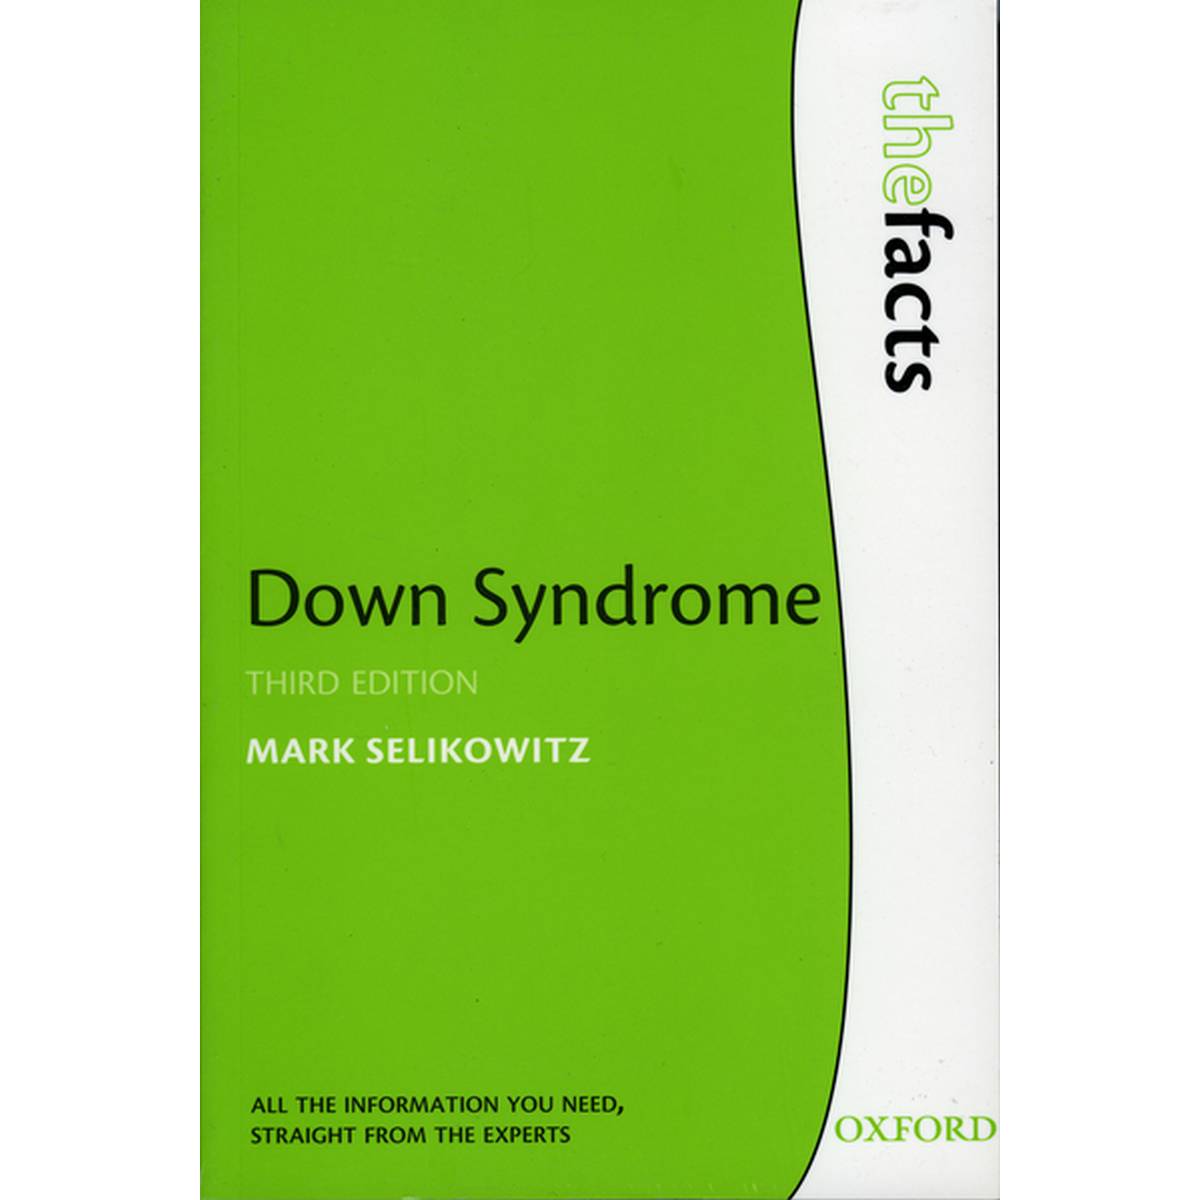 Down Syndrome (The Facts)